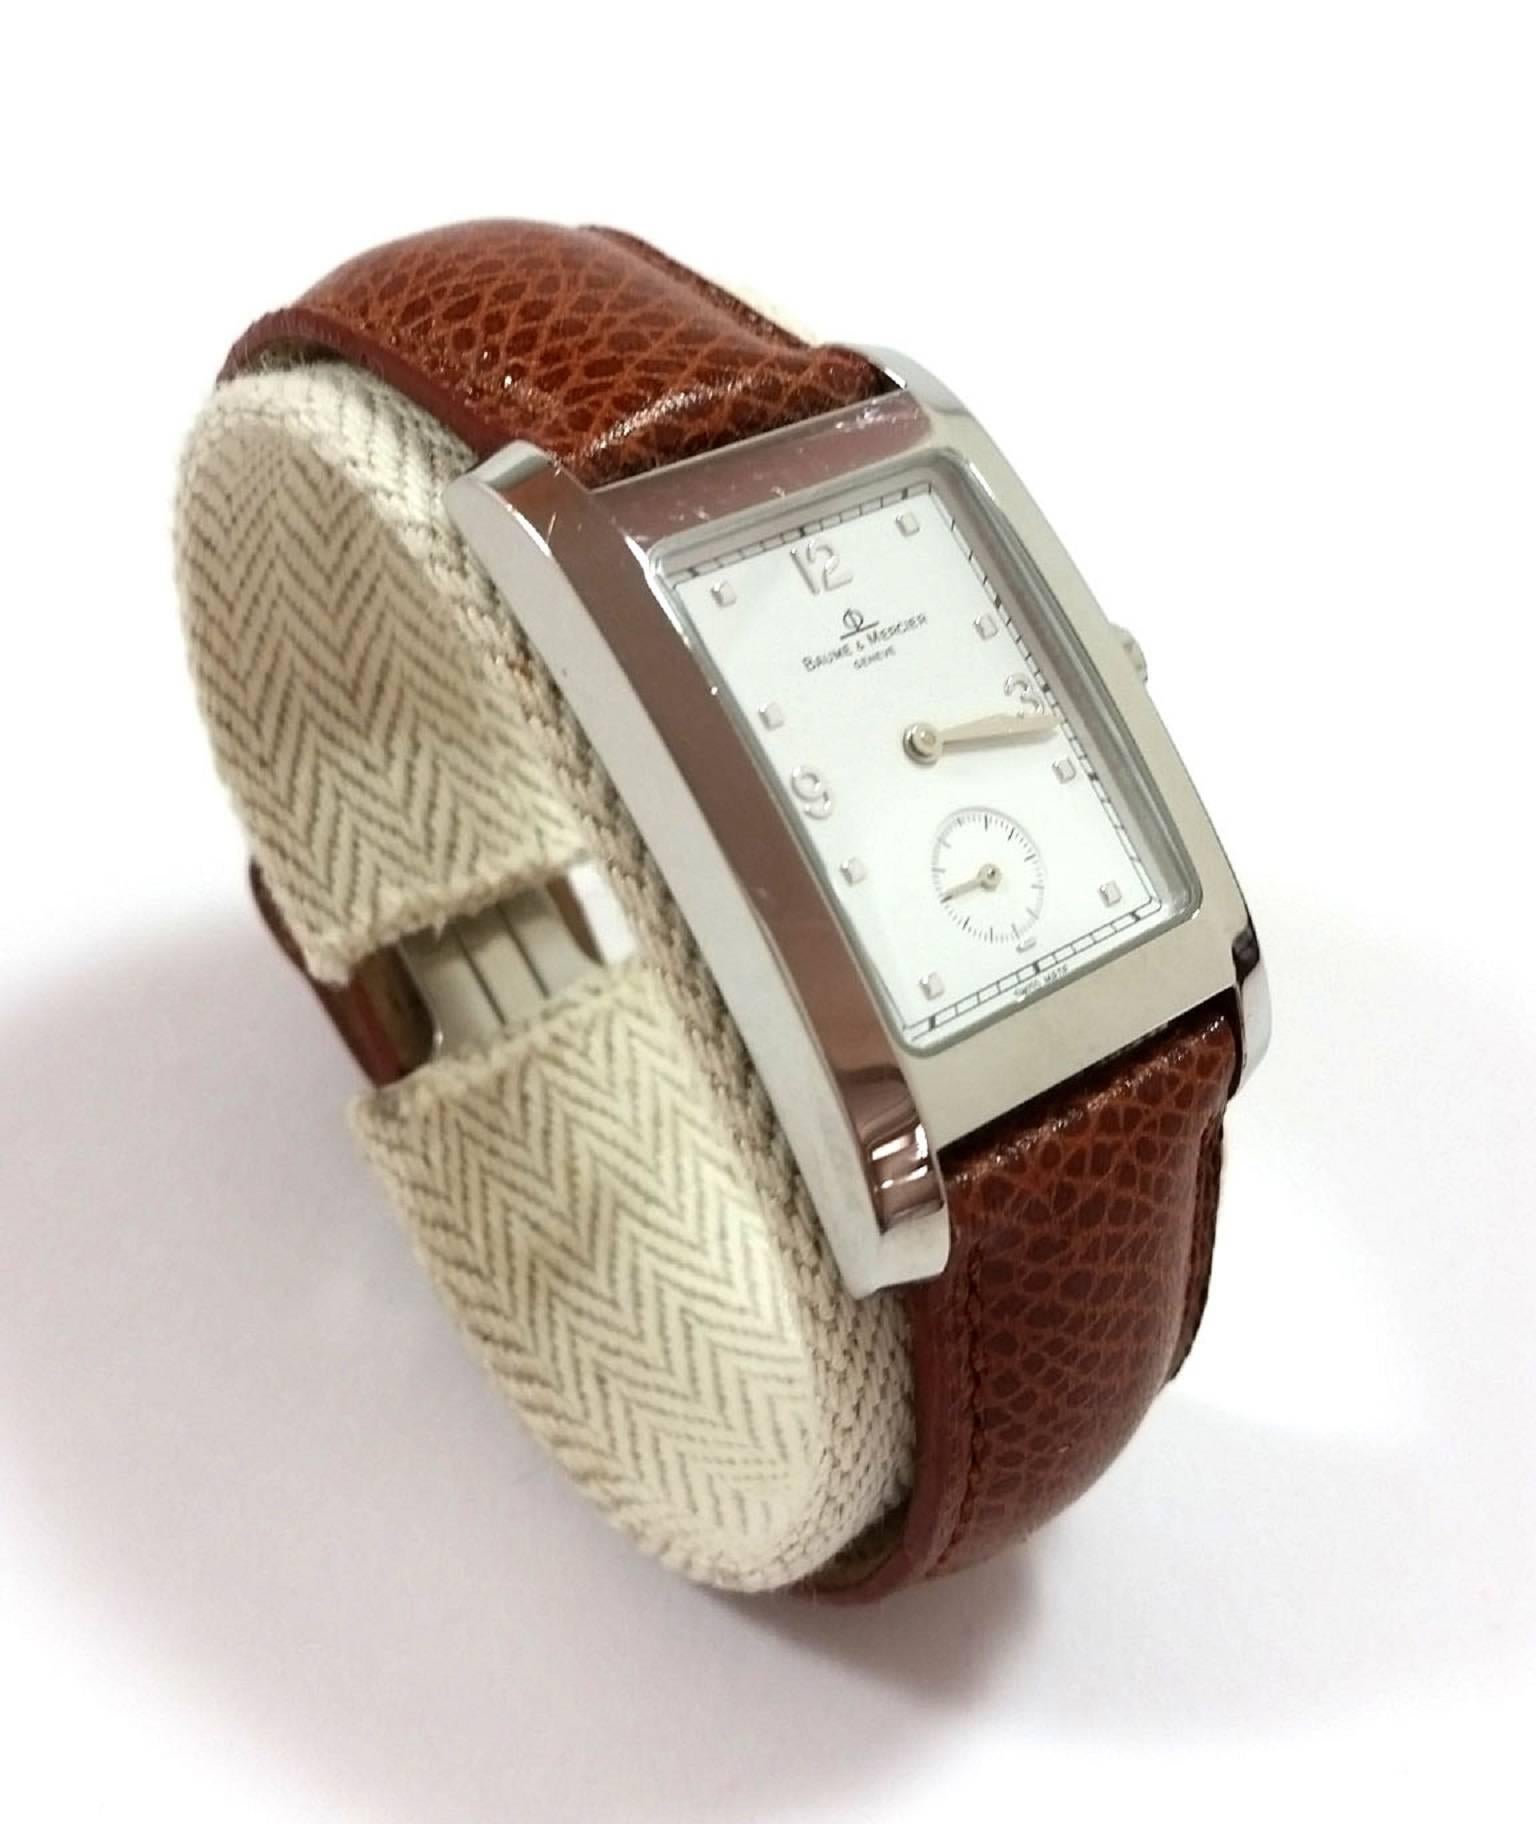 - QUARTZ
- steel material
- White dial with brown leather strap
- Folding buckle
- Seconds at 6am
- waterproof
- New stock (with protective plastic)
- Warranty card